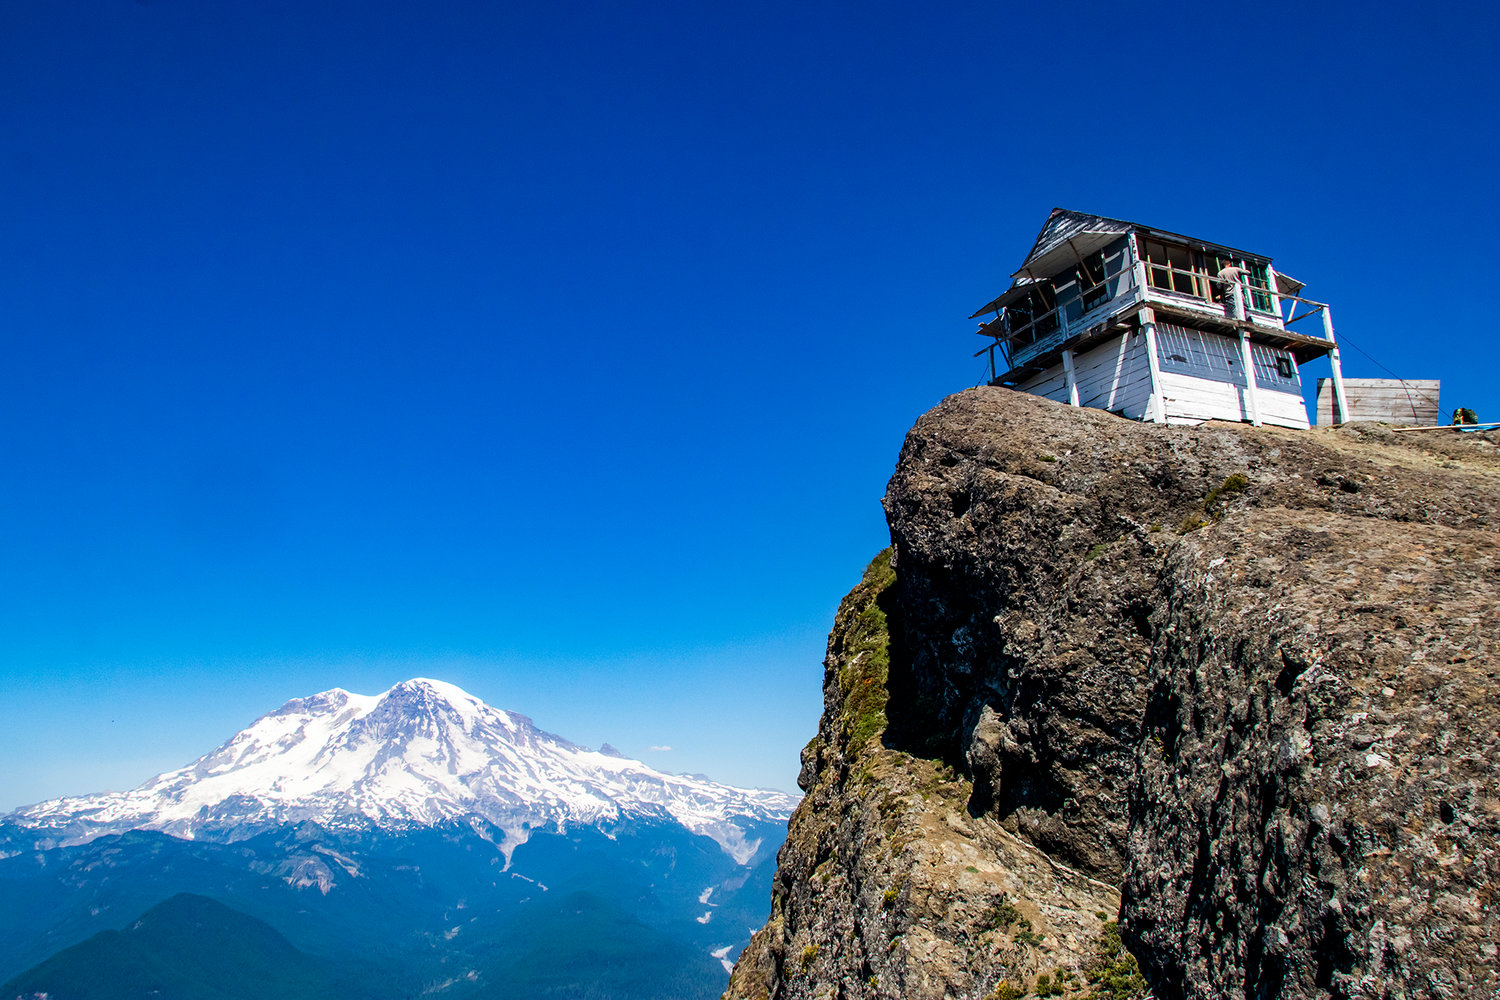 High Rock Lookout is seen in front of Mt. Rainier Tuesday afternoon in the Gifford Pinchot National Forest.